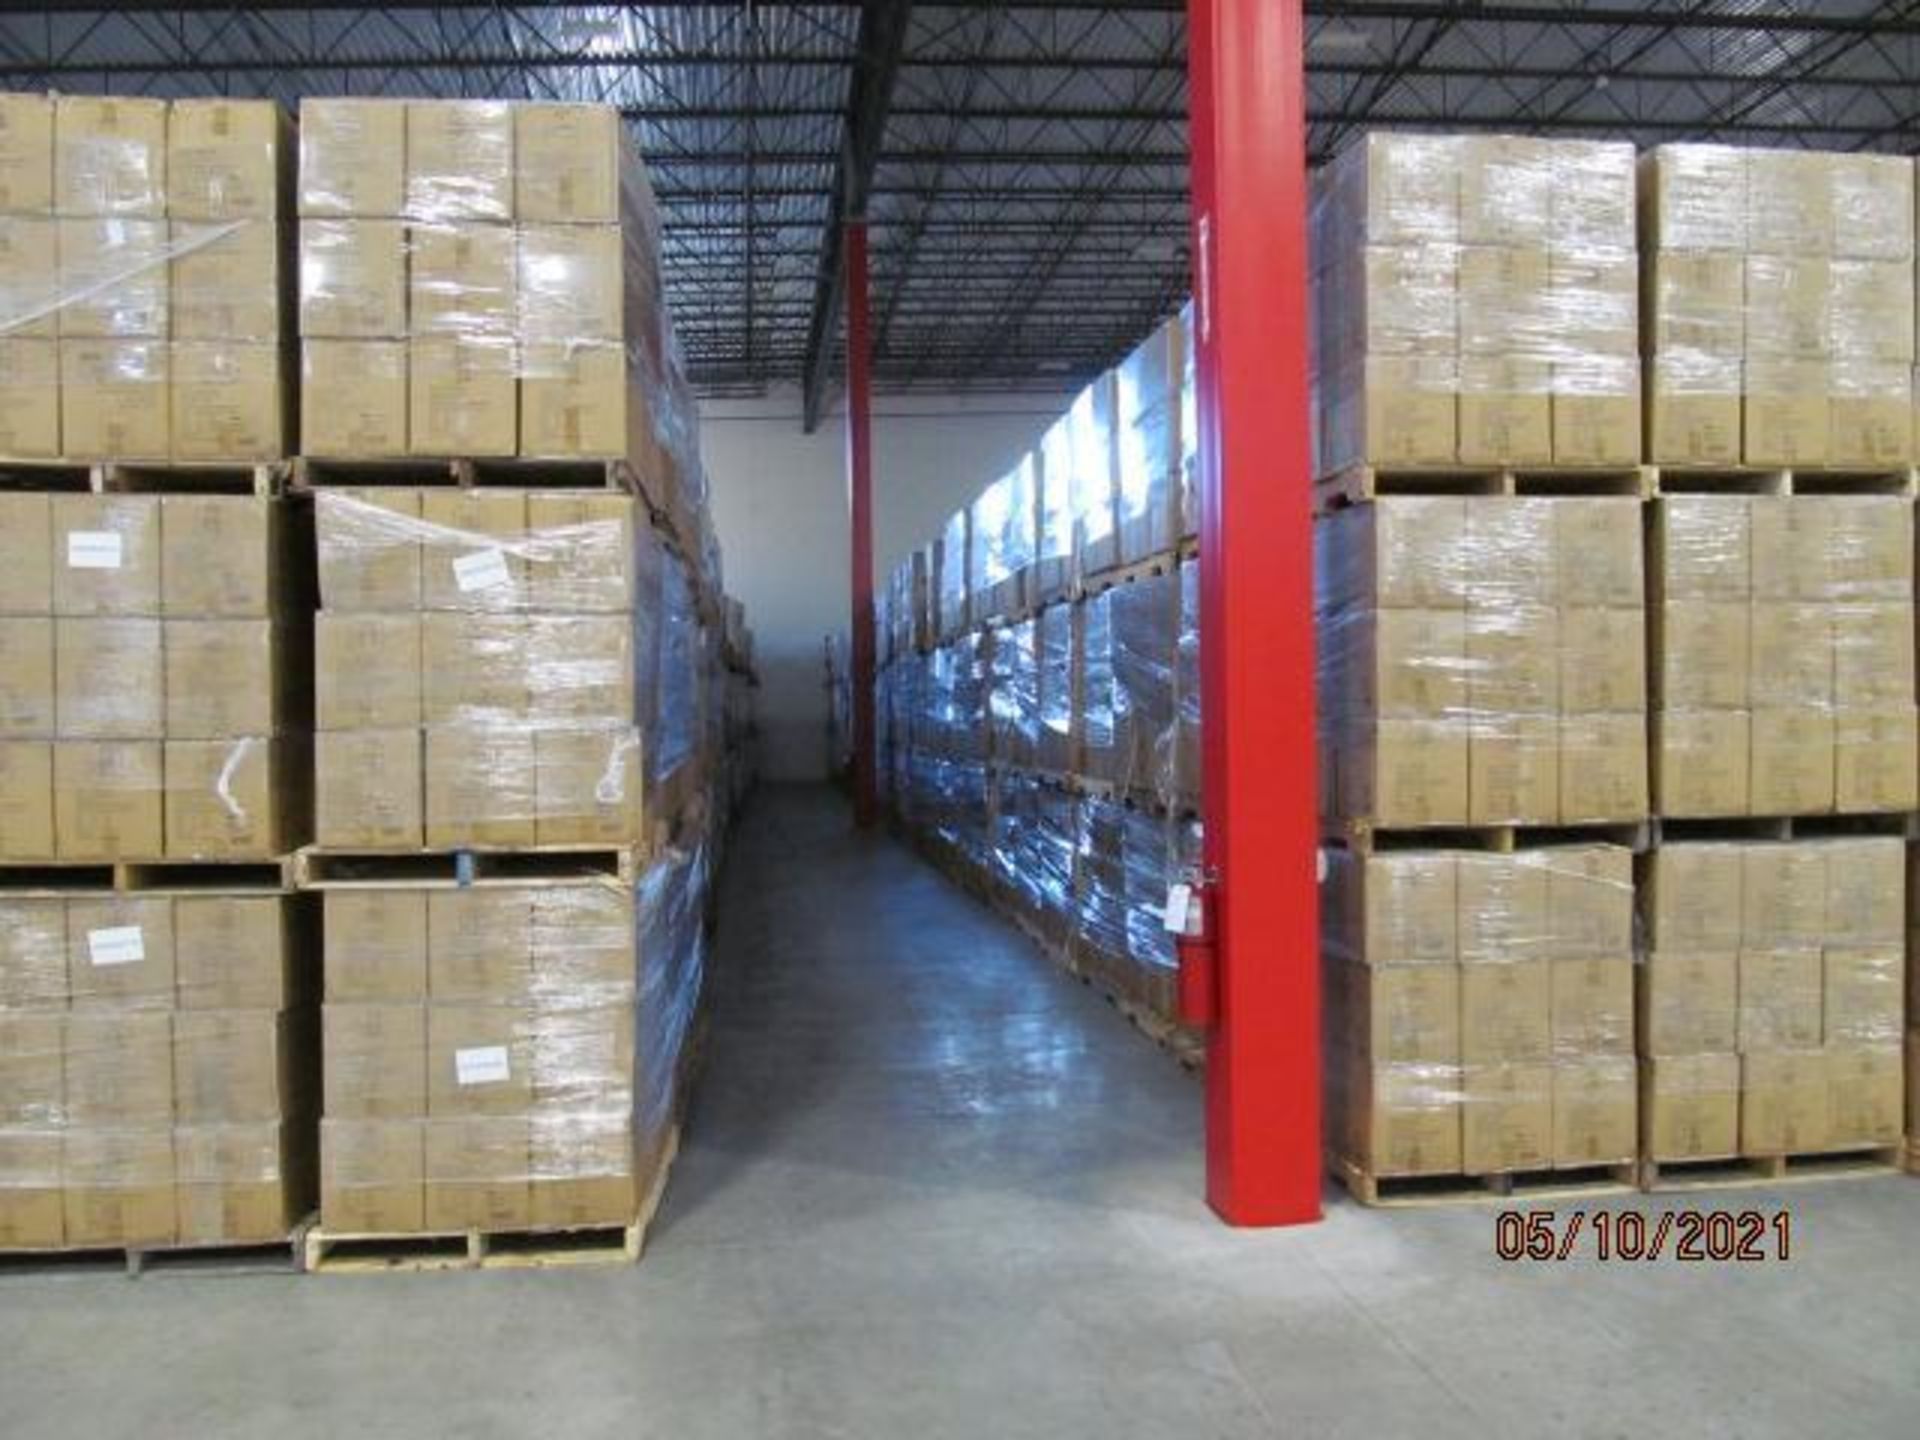 Lot of Waxman Kleen Freak Sanitizing Wipes consisting of 6,480 packages on 10 pallets. Each package - Image 9 of 11